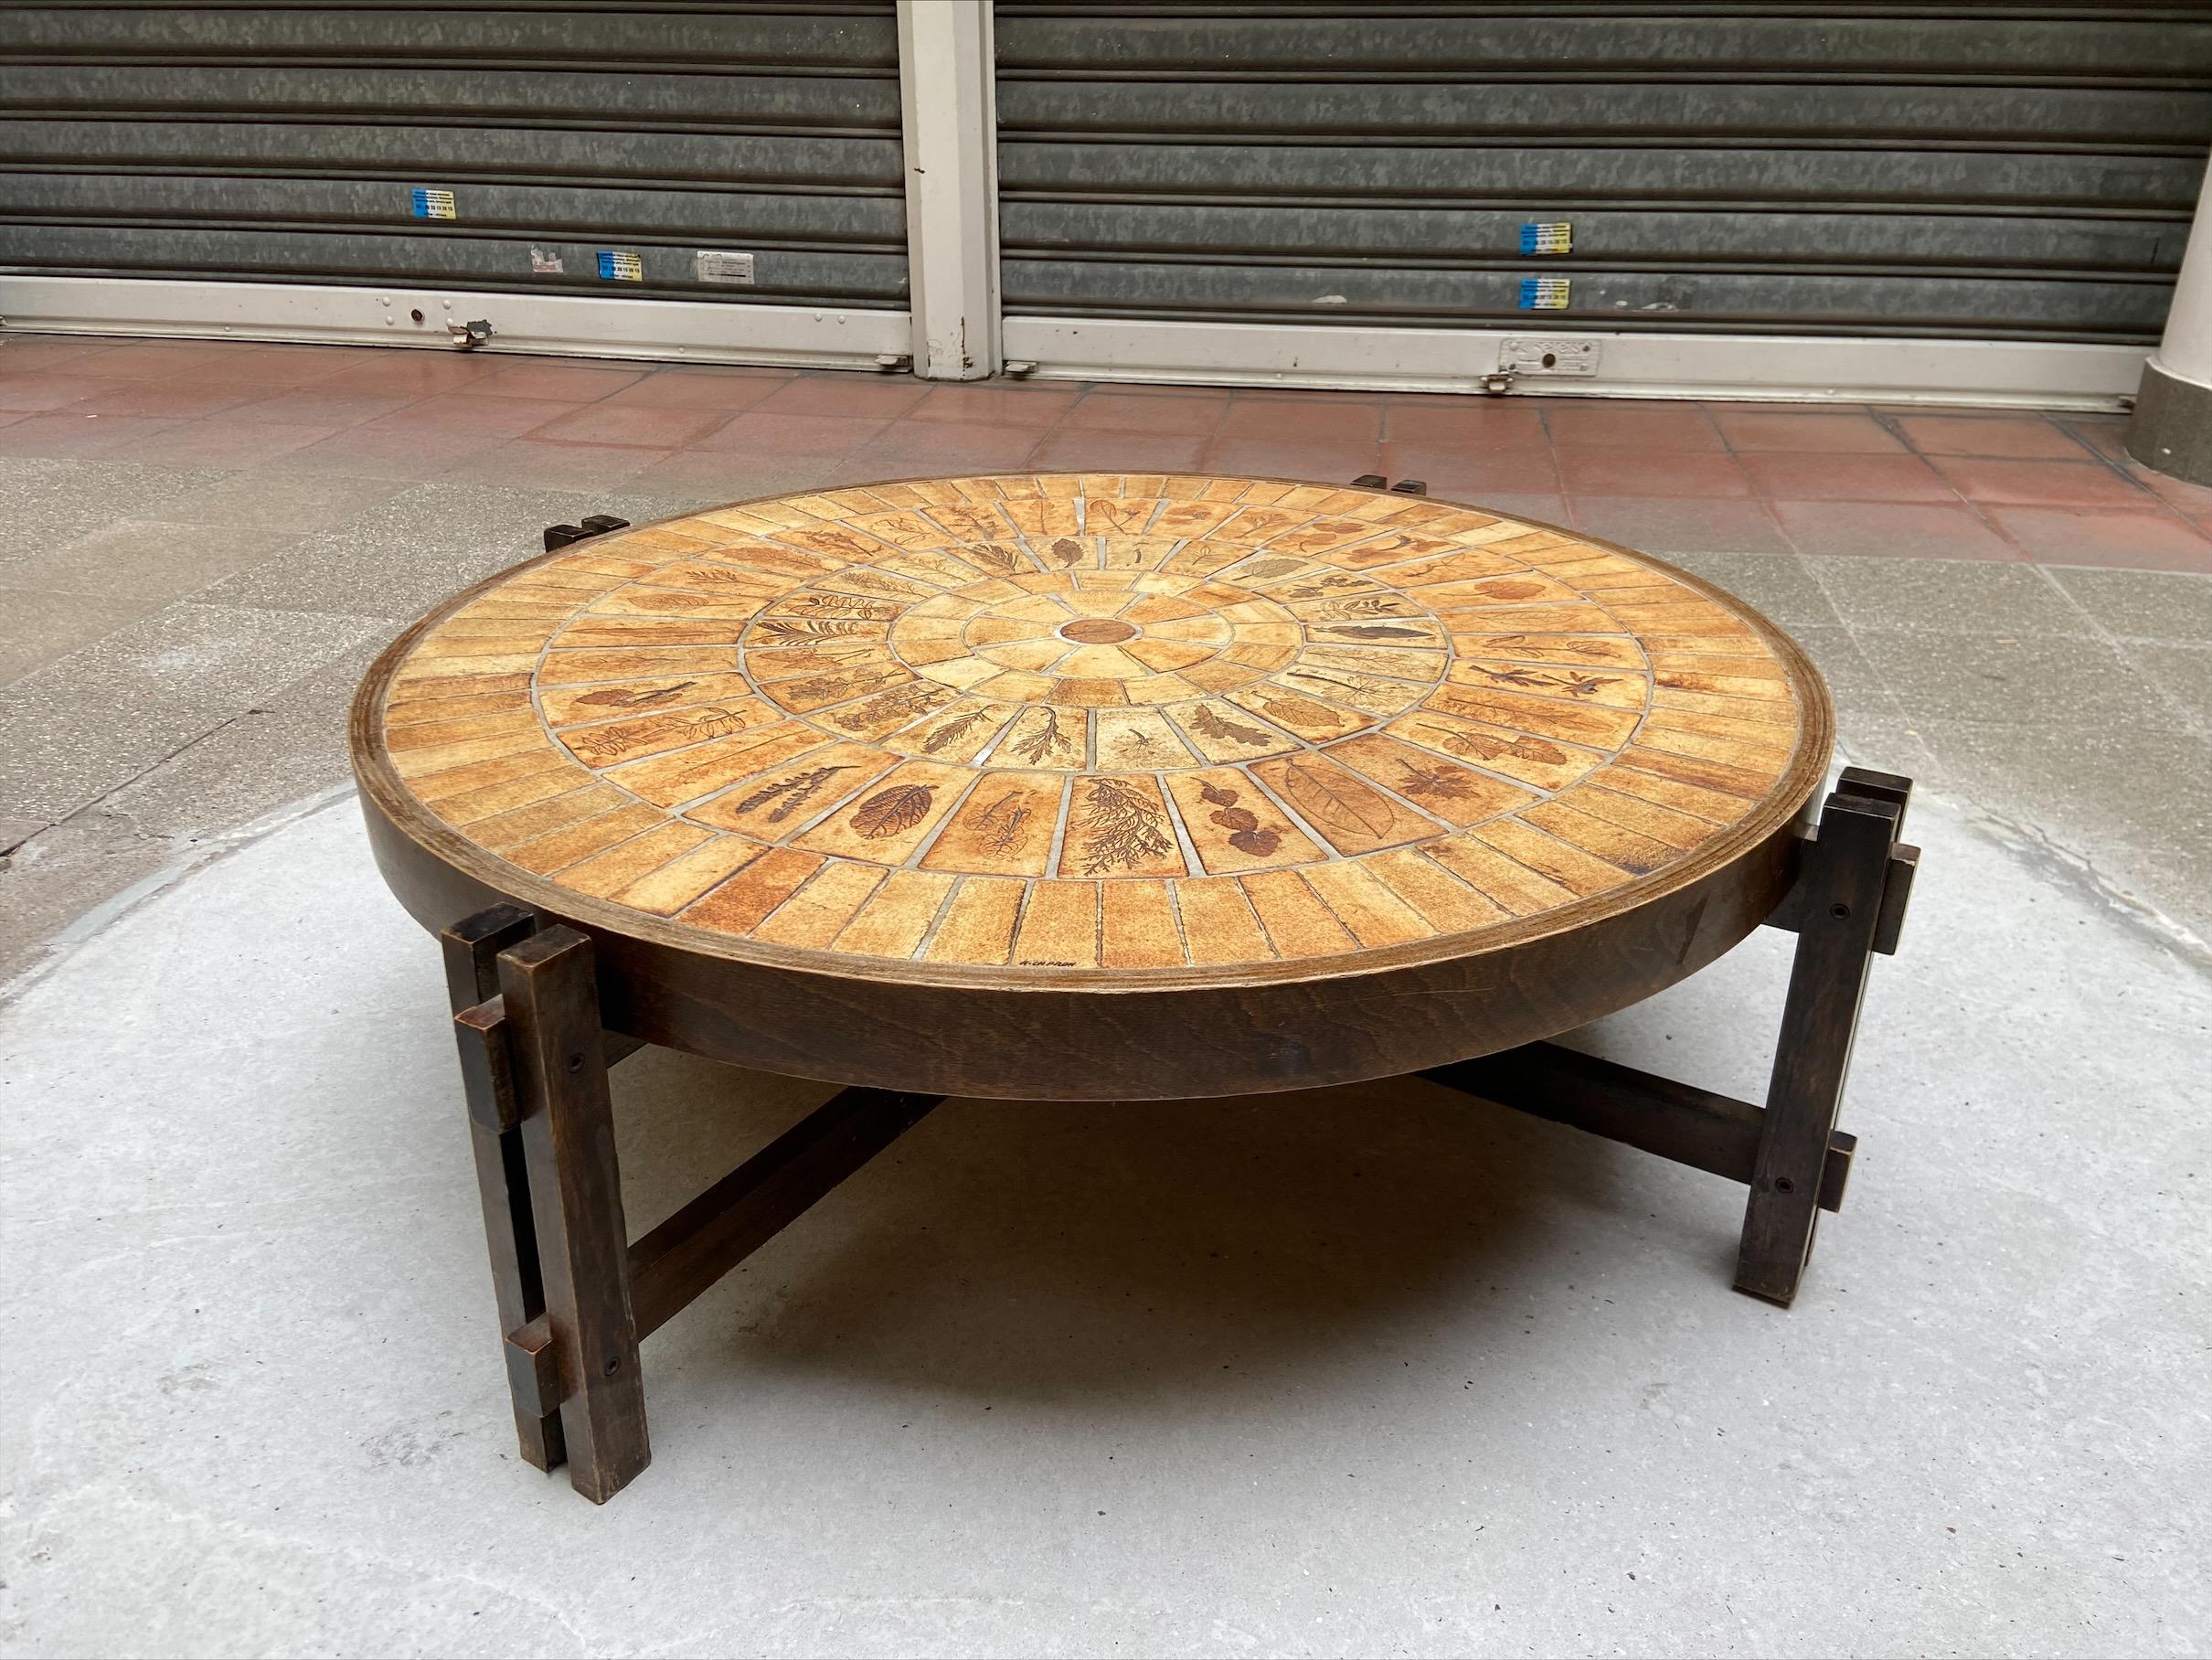 Coffee table - Roger Capron
Sandstone and wood
Circa 1960 -70
Measures: D 95 x H 33cm
Very good vintage state
The colors of autumn are tranquil in all shades of beige and ocher and the nature of capron gently imposes itself on our gaze even as